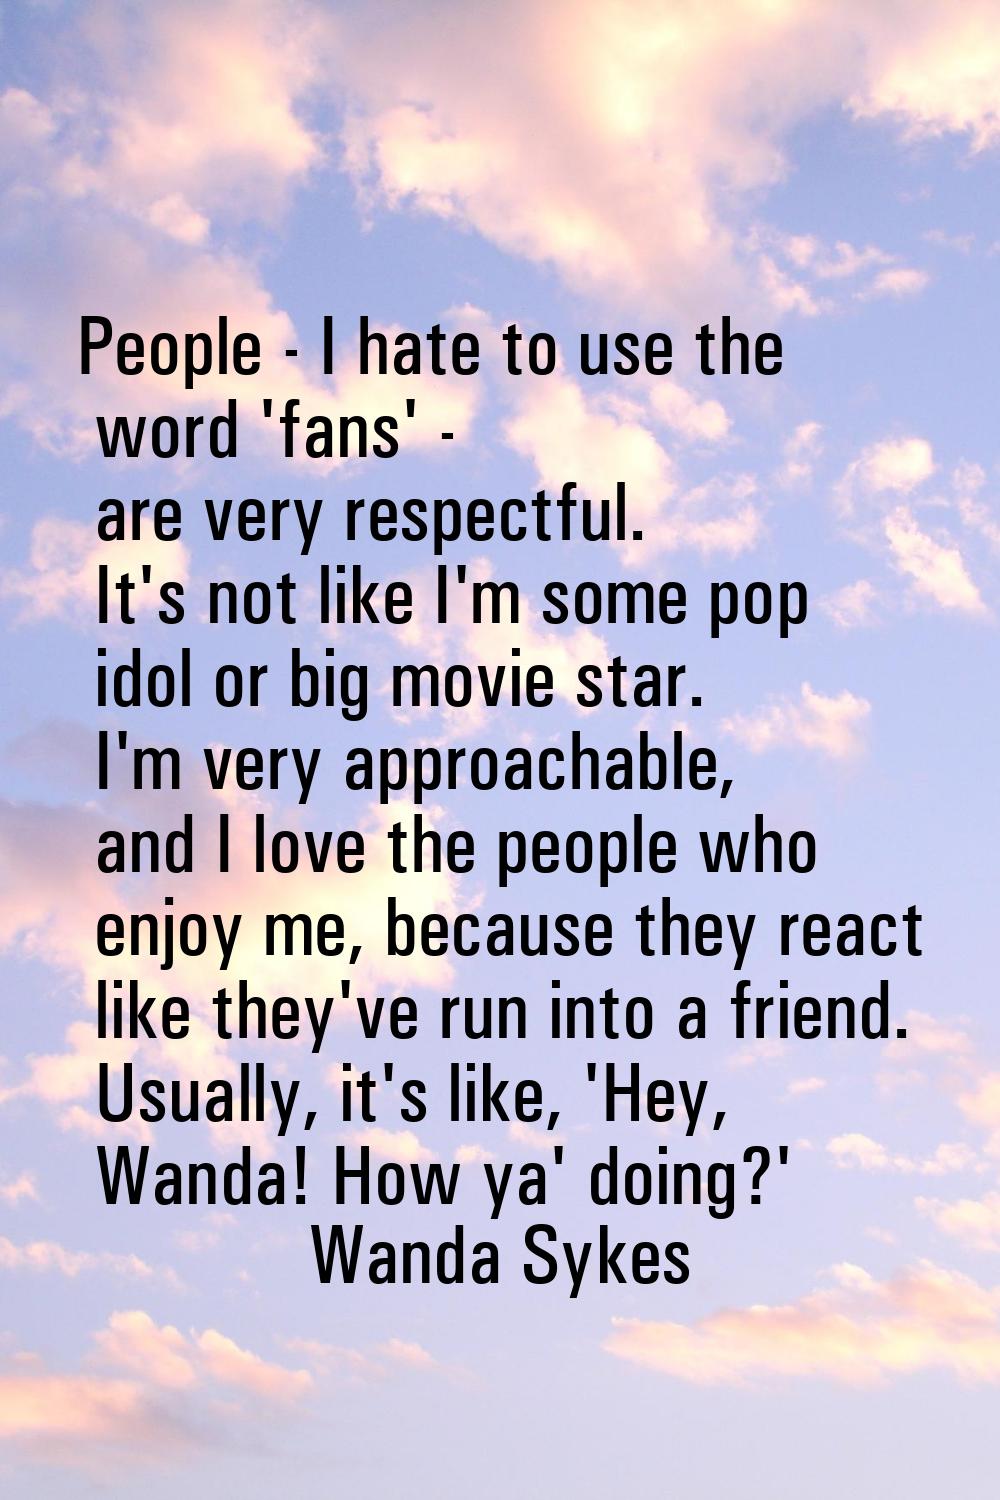 People - I hate to use the word 'fans' - are very respectful. It's not like I'm some pop idol or bi